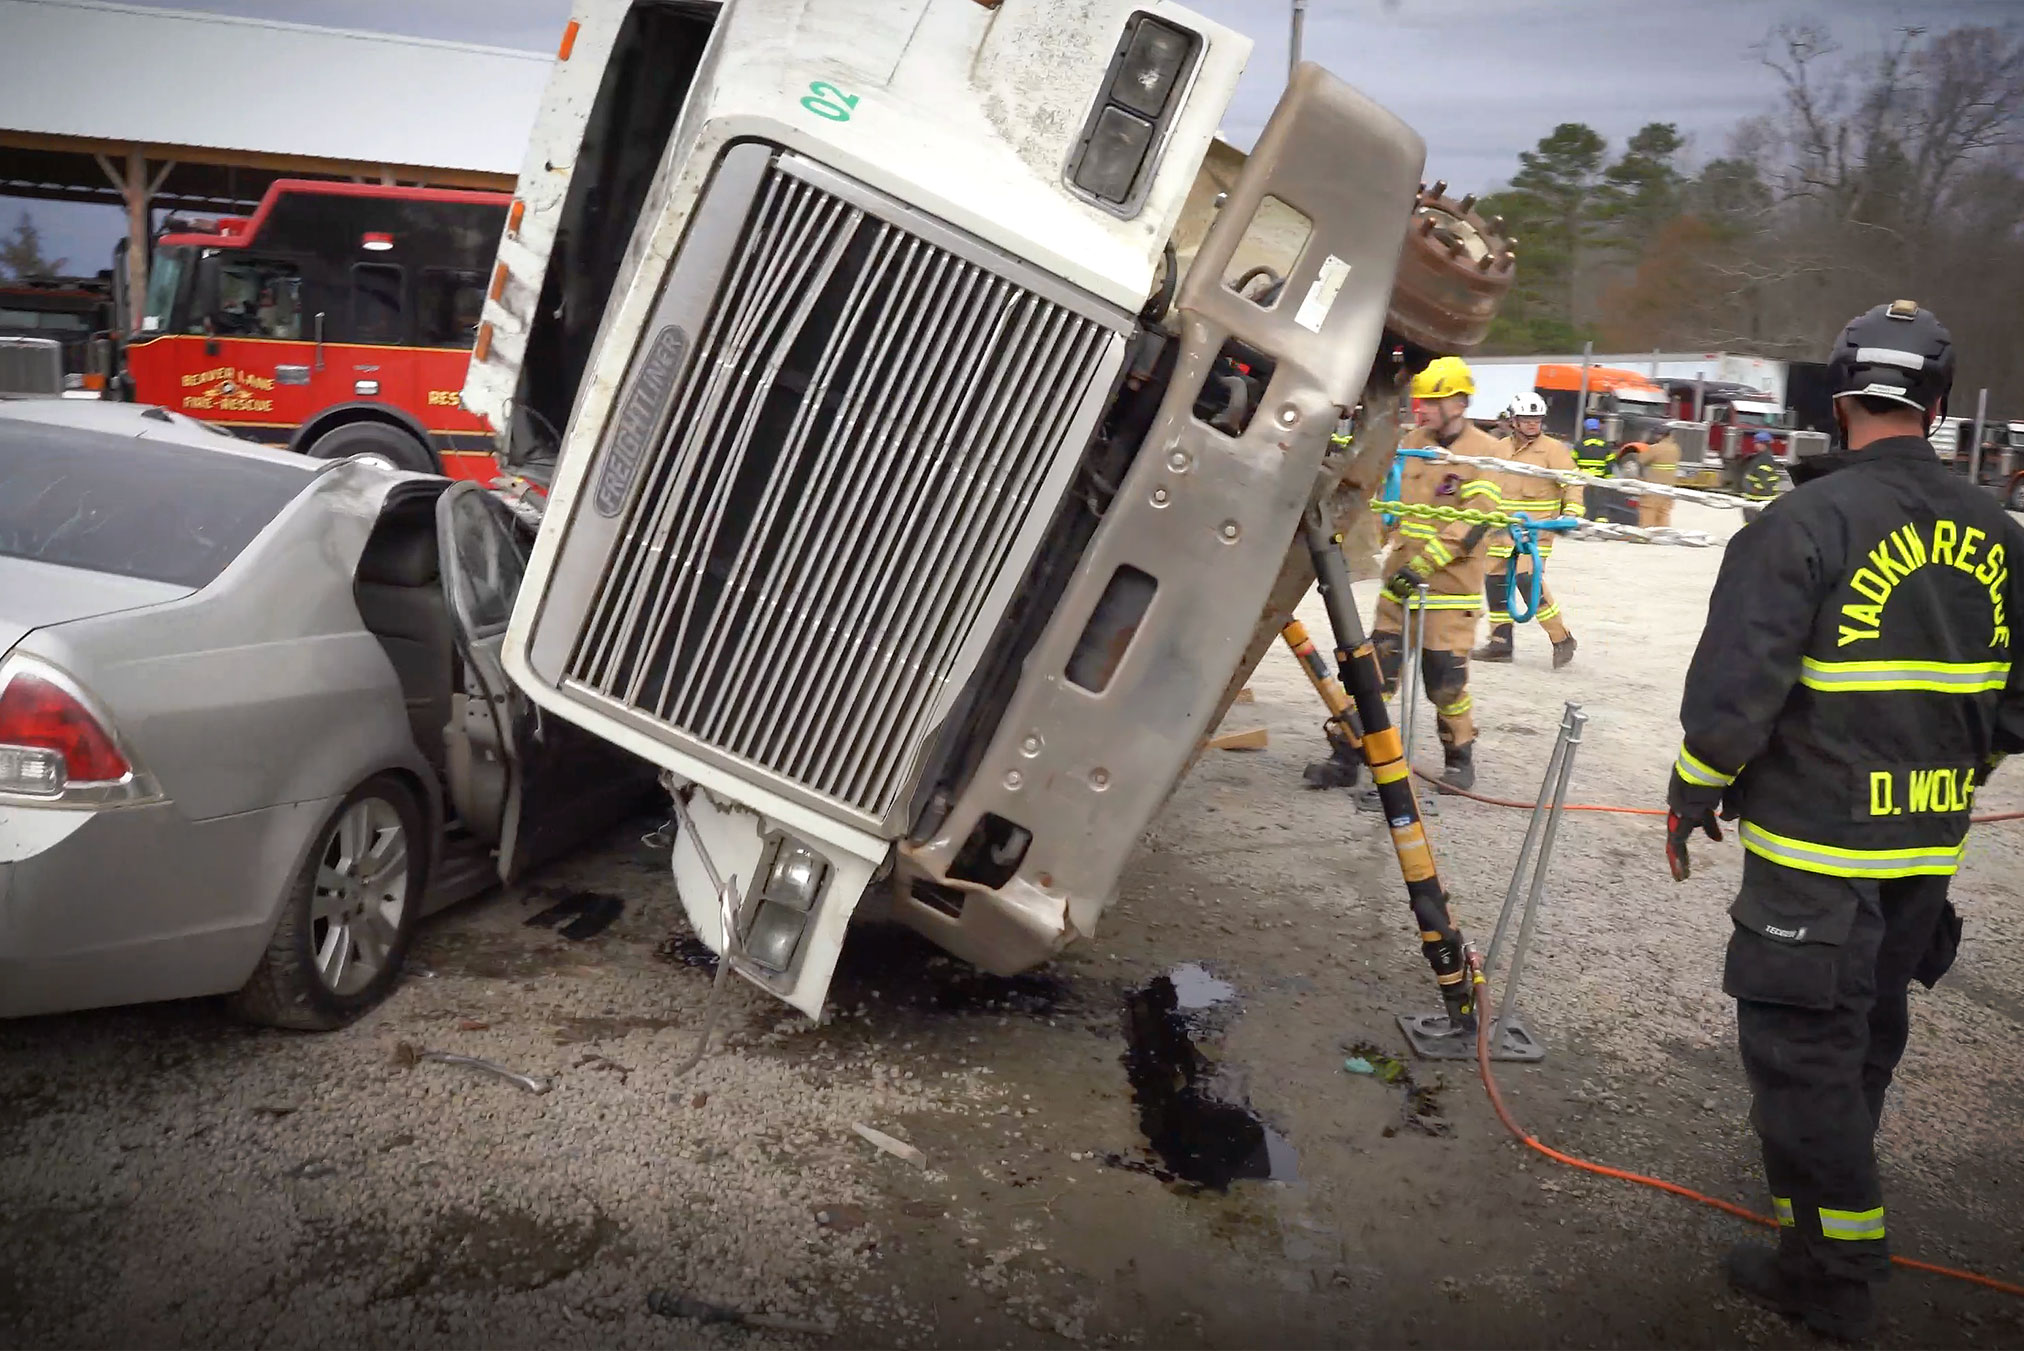 Featured image for “Heavy Lifting and Stabilization Training: Semi Truck Rolled on Top of Car”